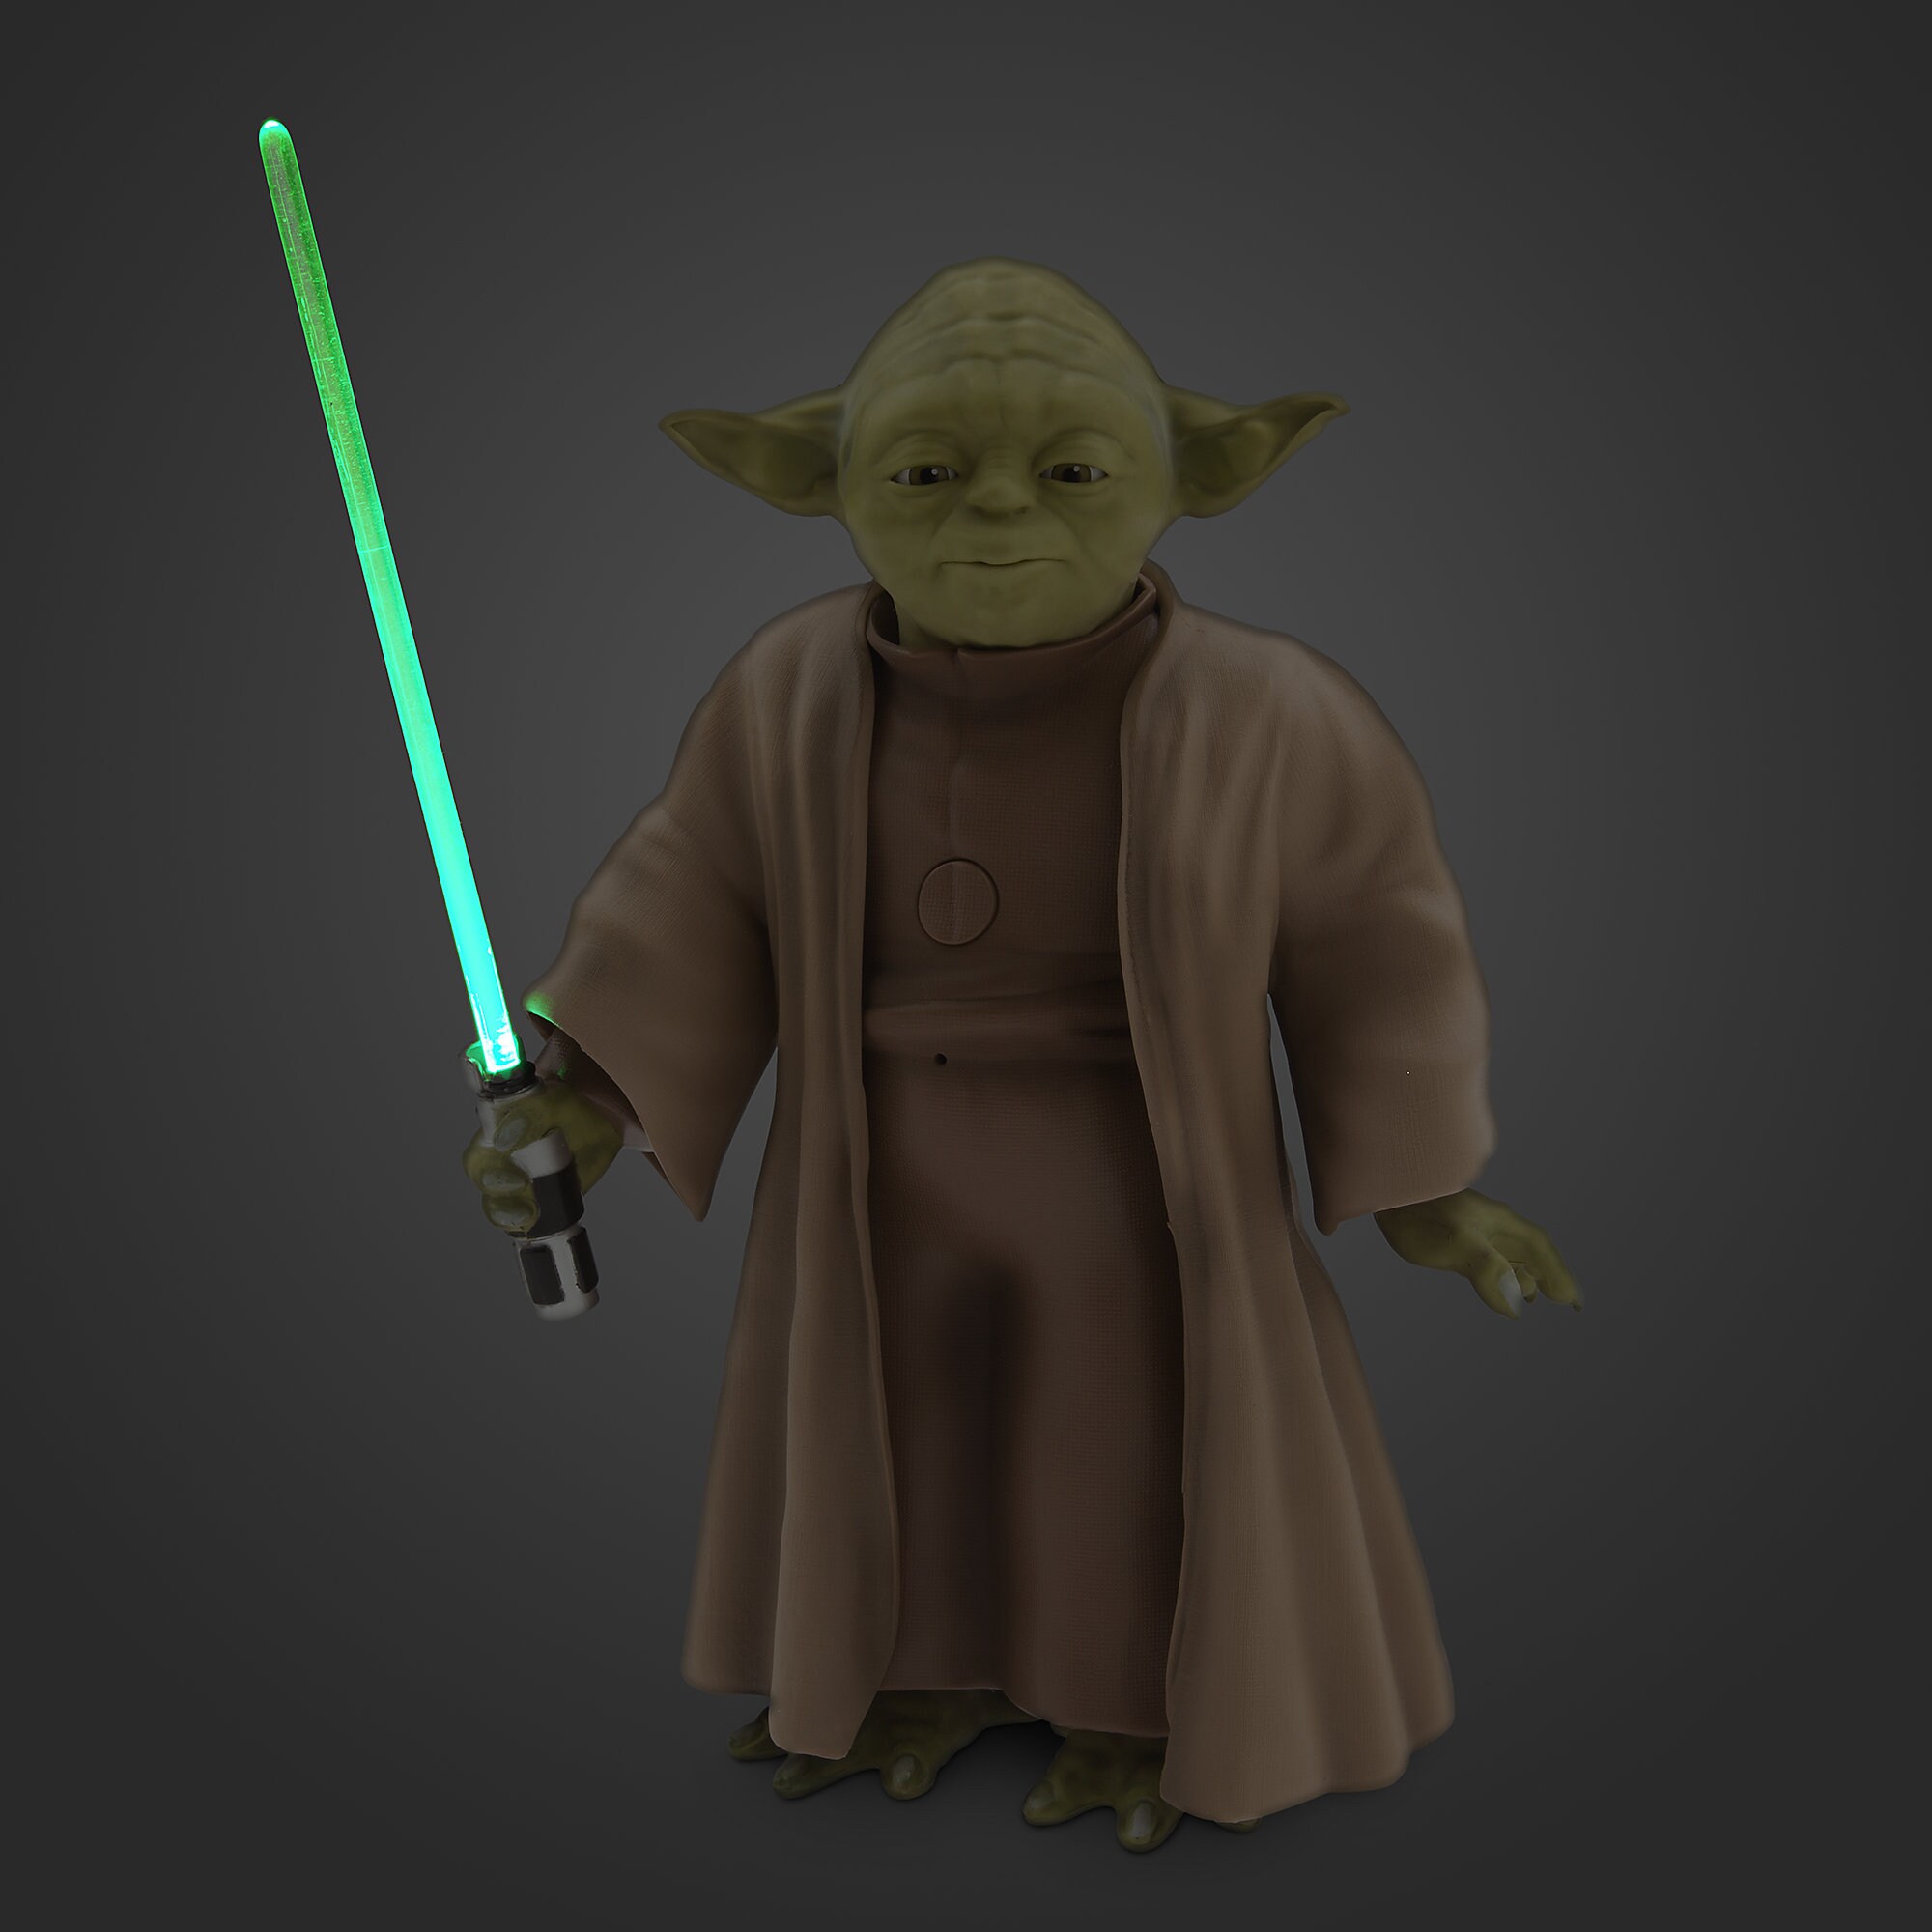 Yoda Talking Action Figure with Lightsaber - 9'' - Star Wars